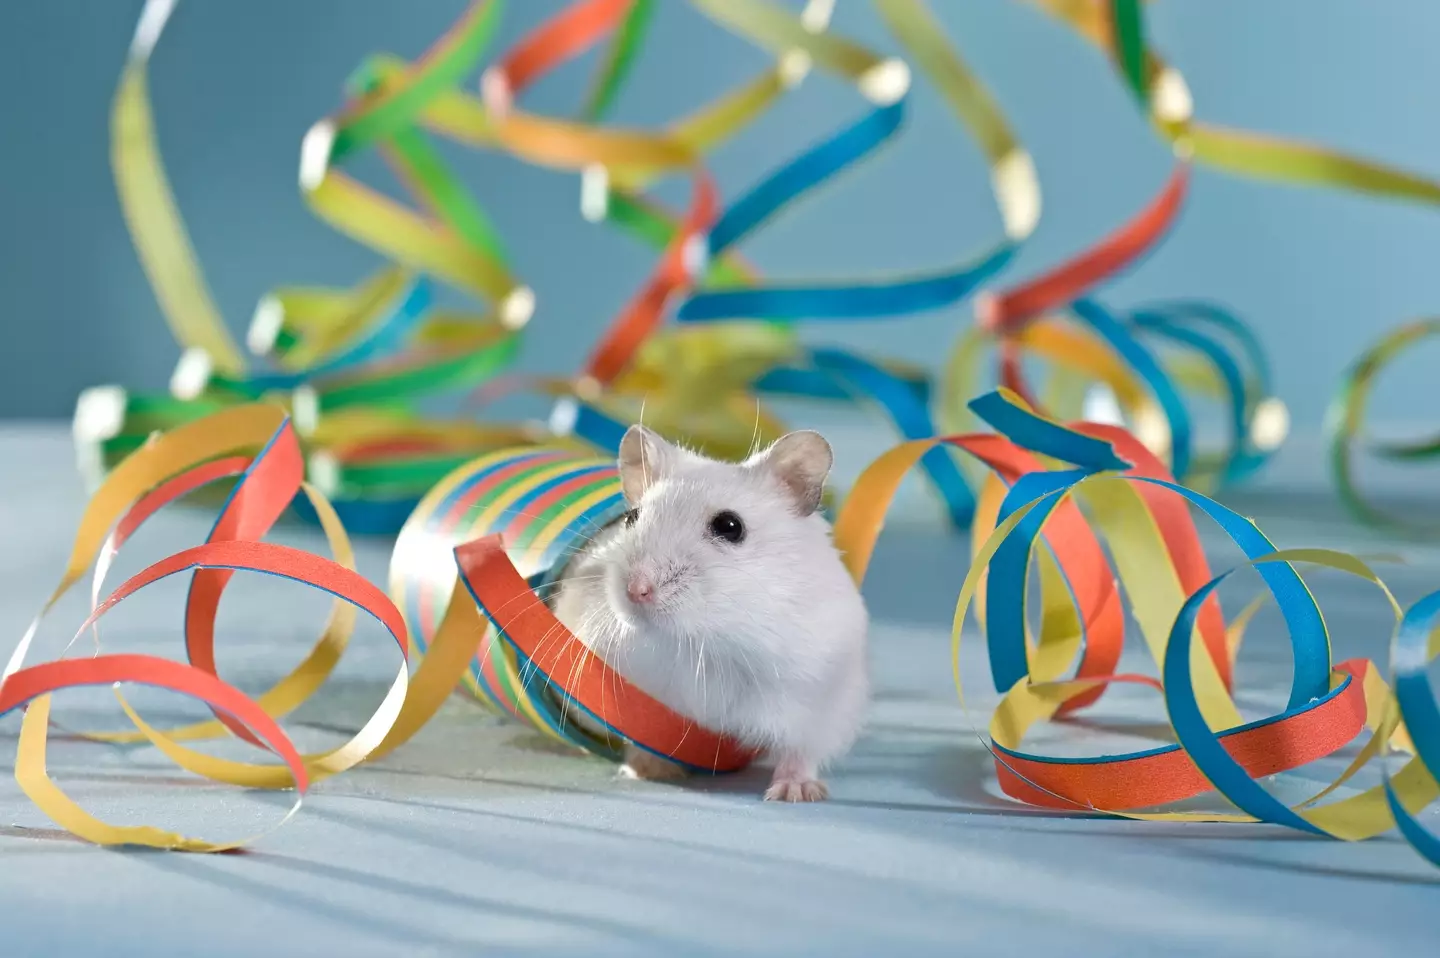 A hamster in happier times, at a birthday party.